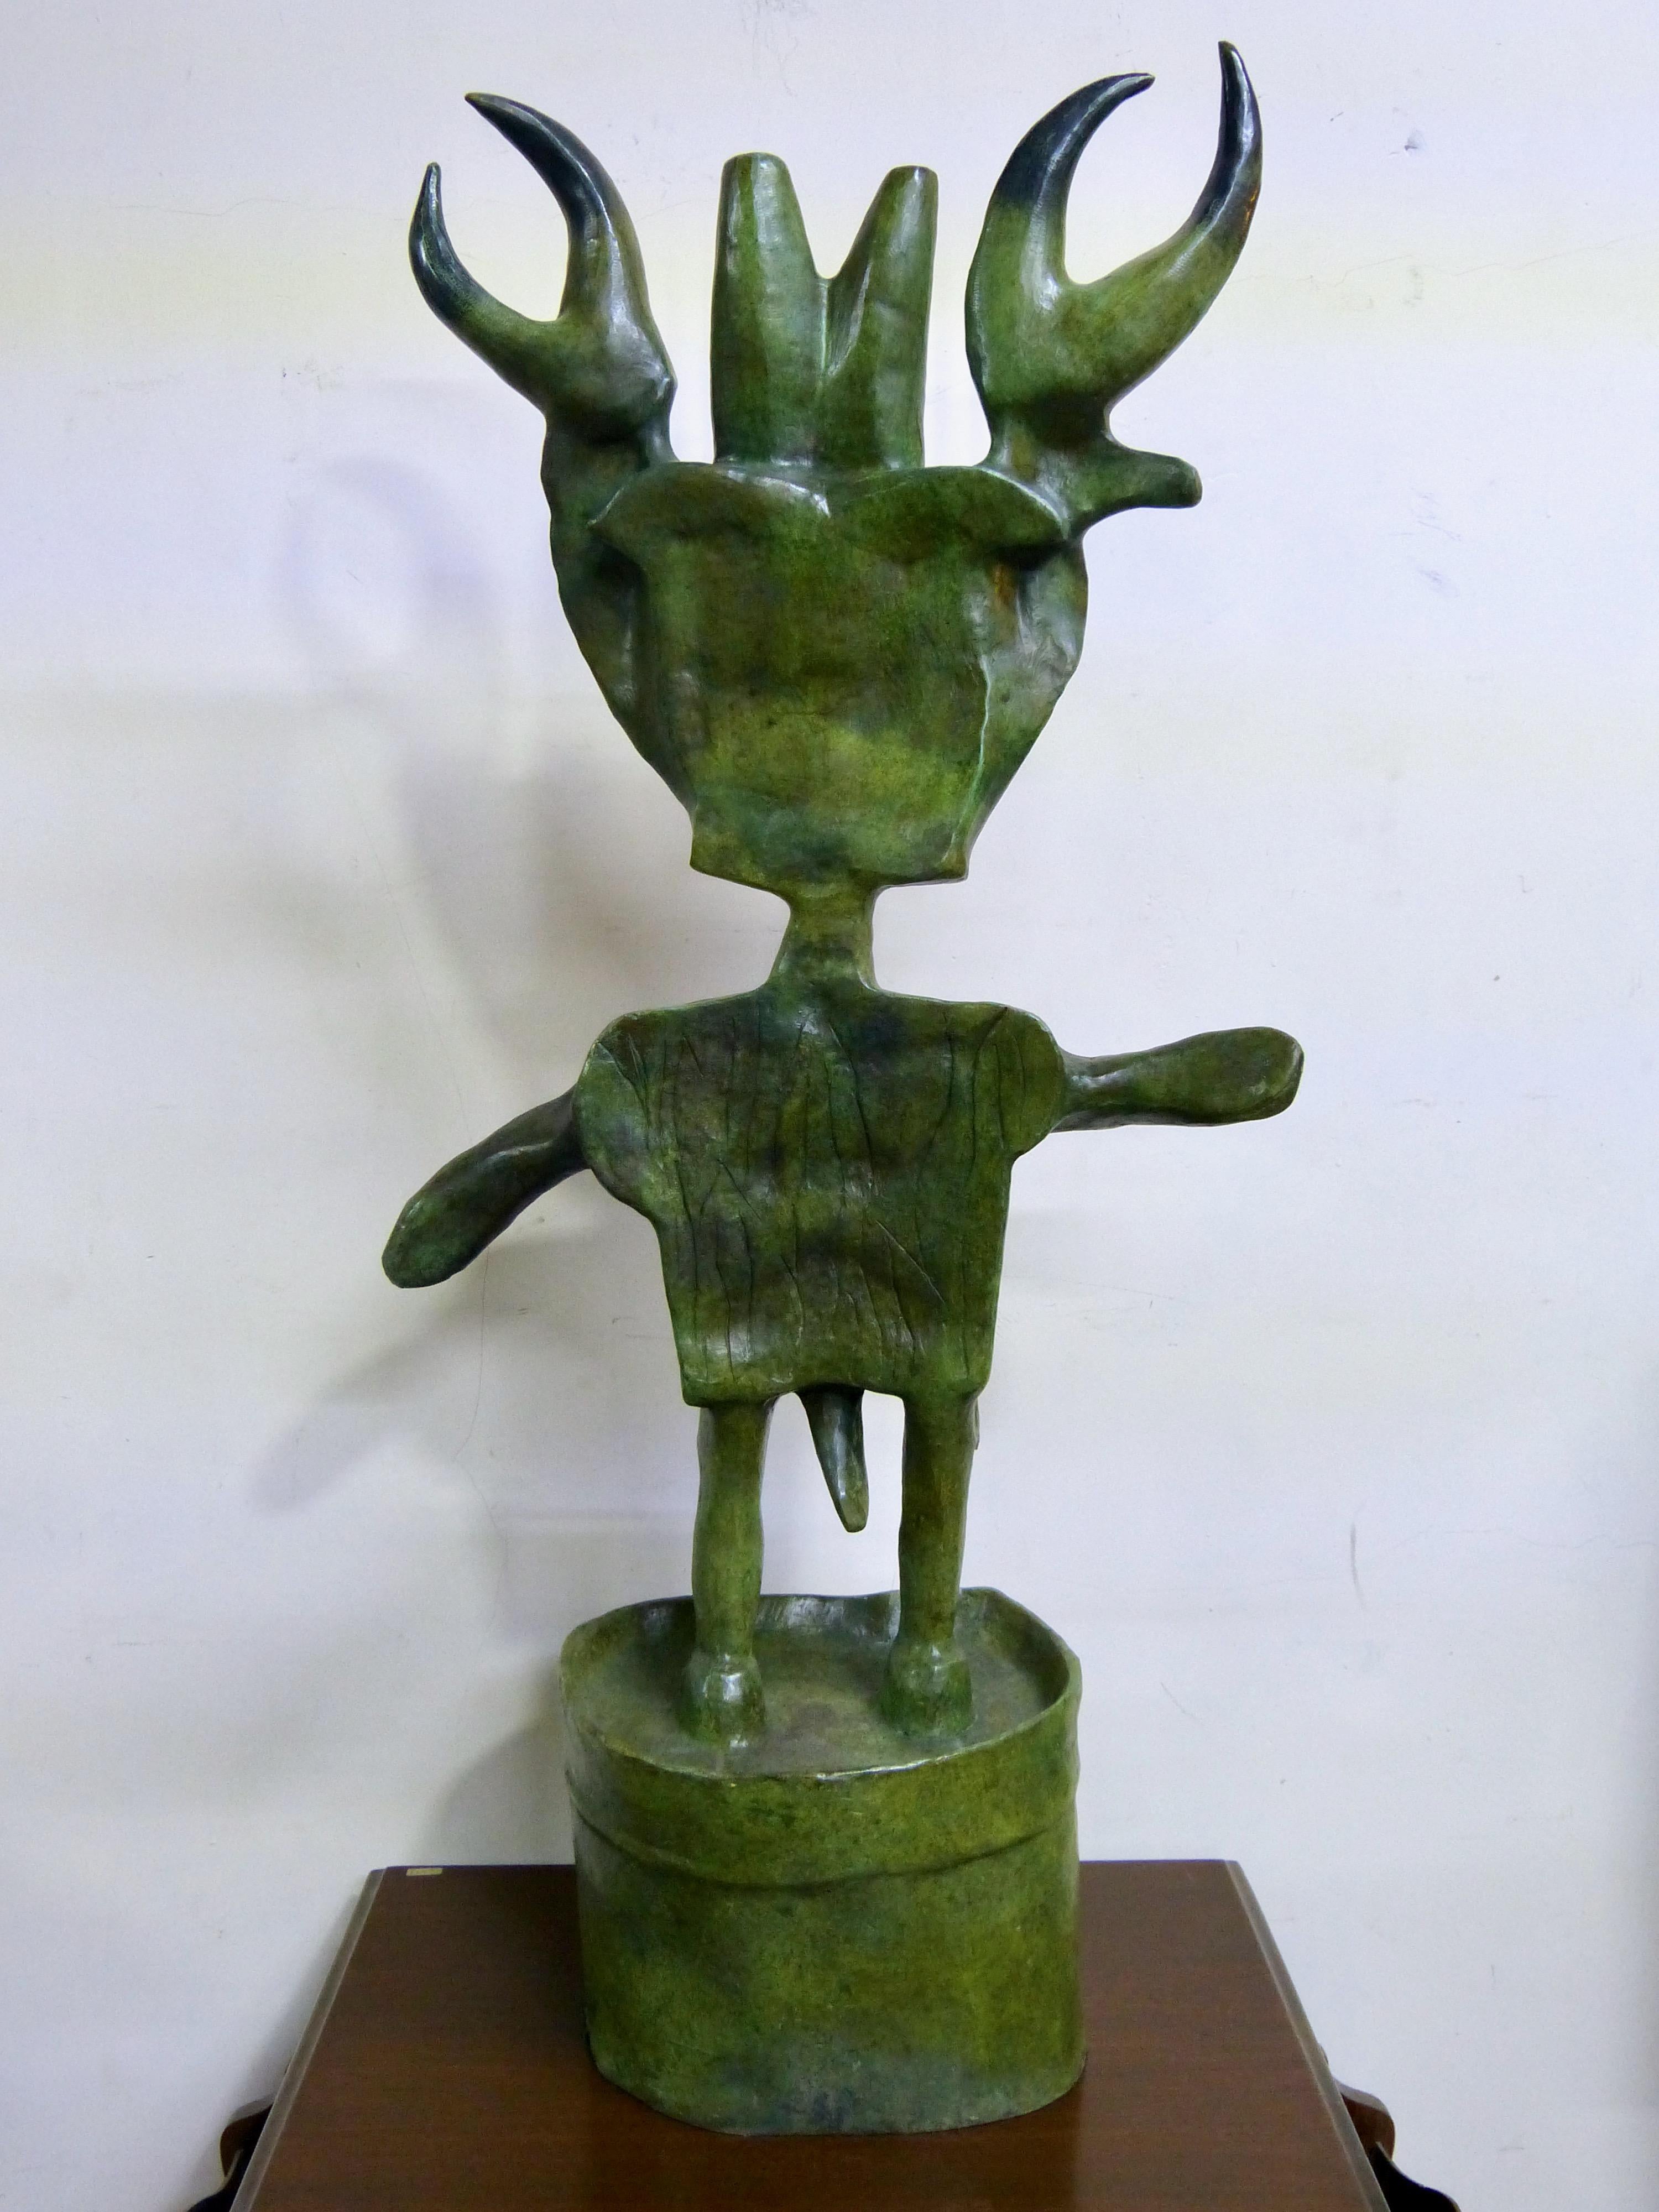 Title: Niño Insecto (Bug Boy)
Author: Sergio Hernandez
Year 2006
Made of Bronze
Edition: P/4 (Author´s Proof)
With “Certificate of Authenticity”.